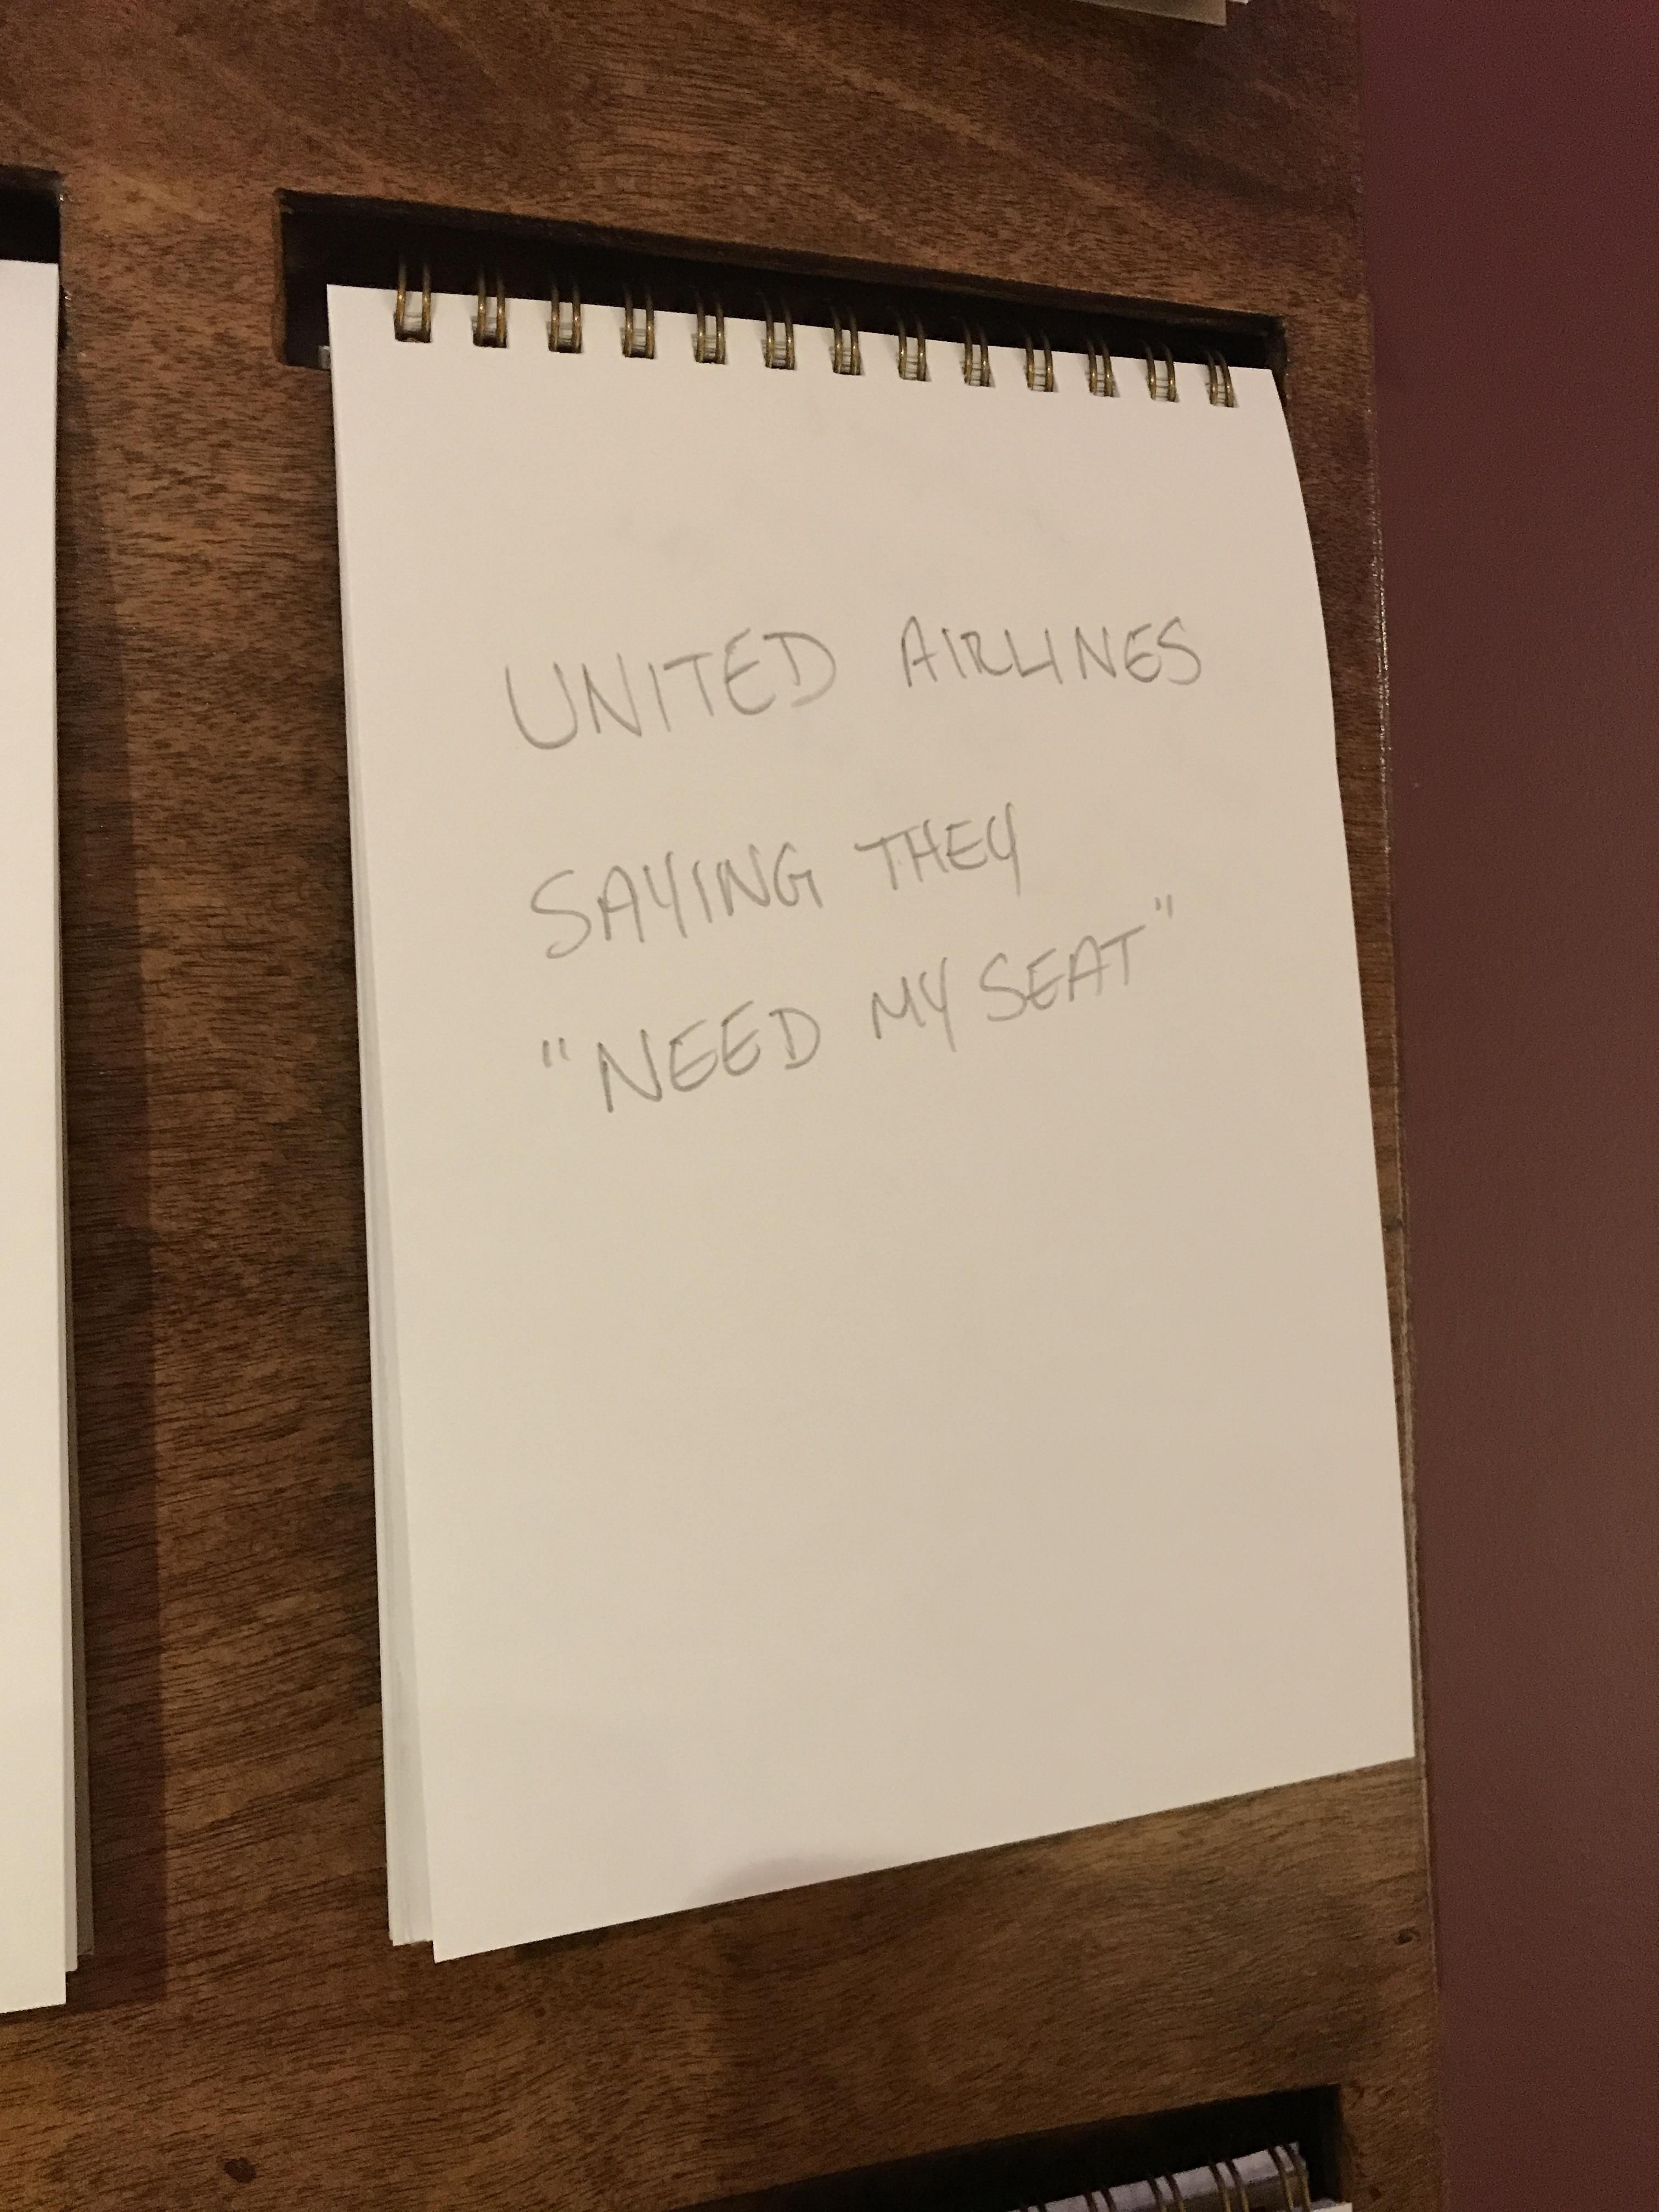 People were asked to write down their fear at a museum exhibit